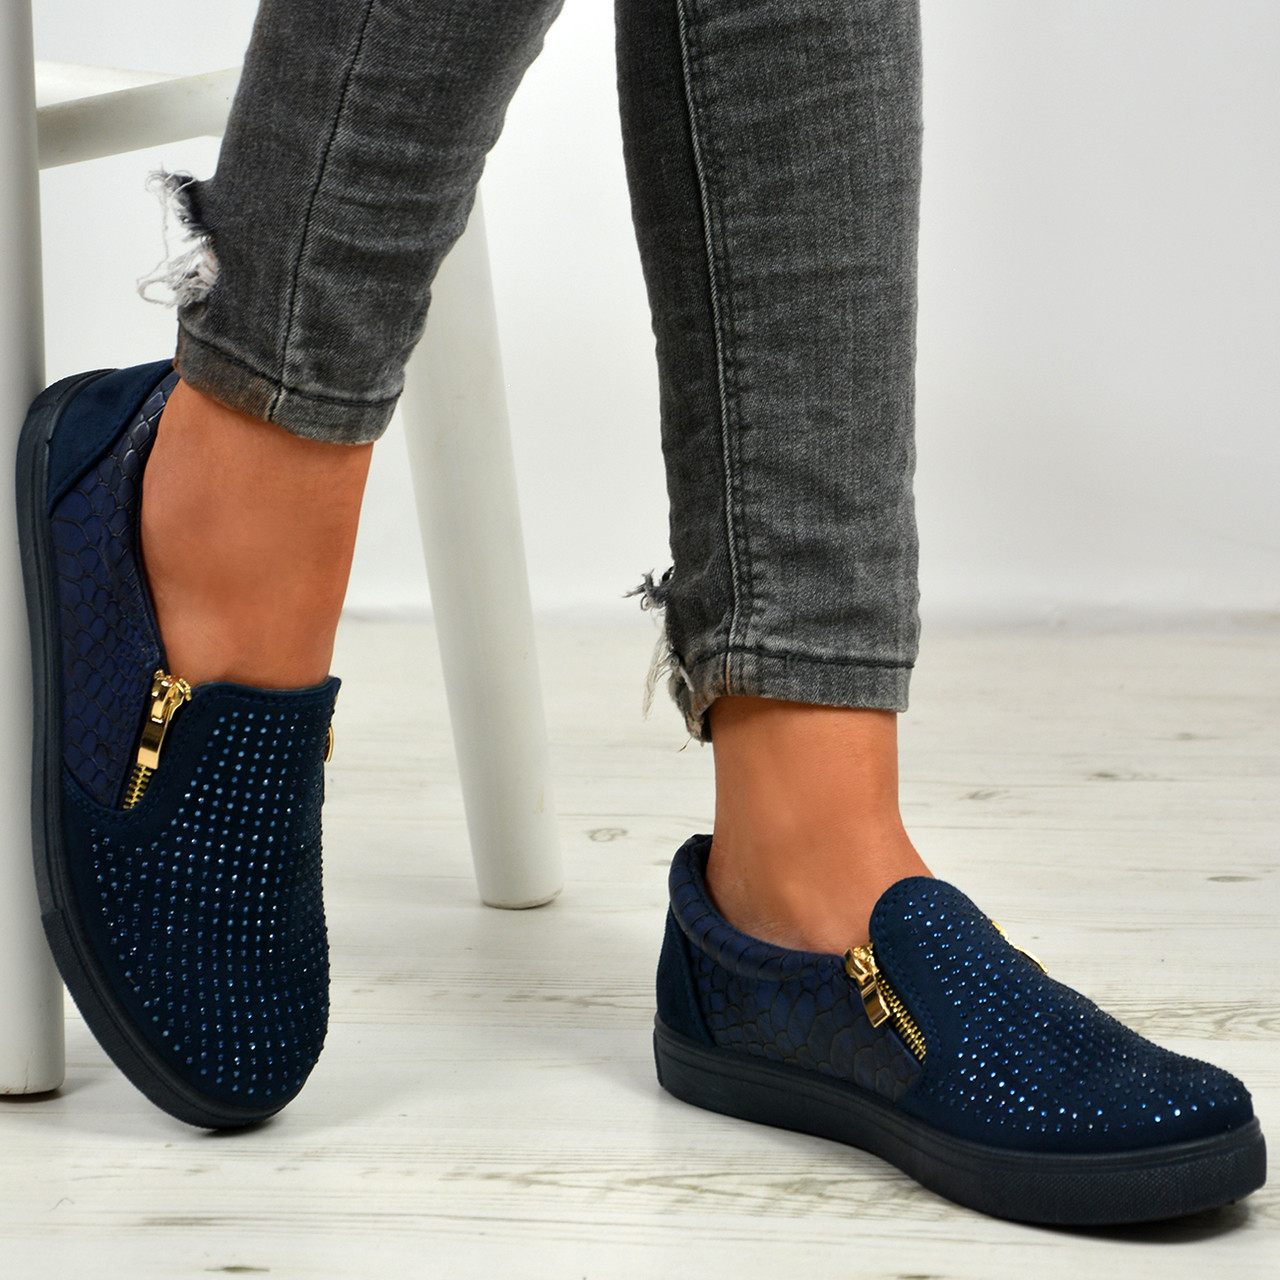 navy blue slip on trainers